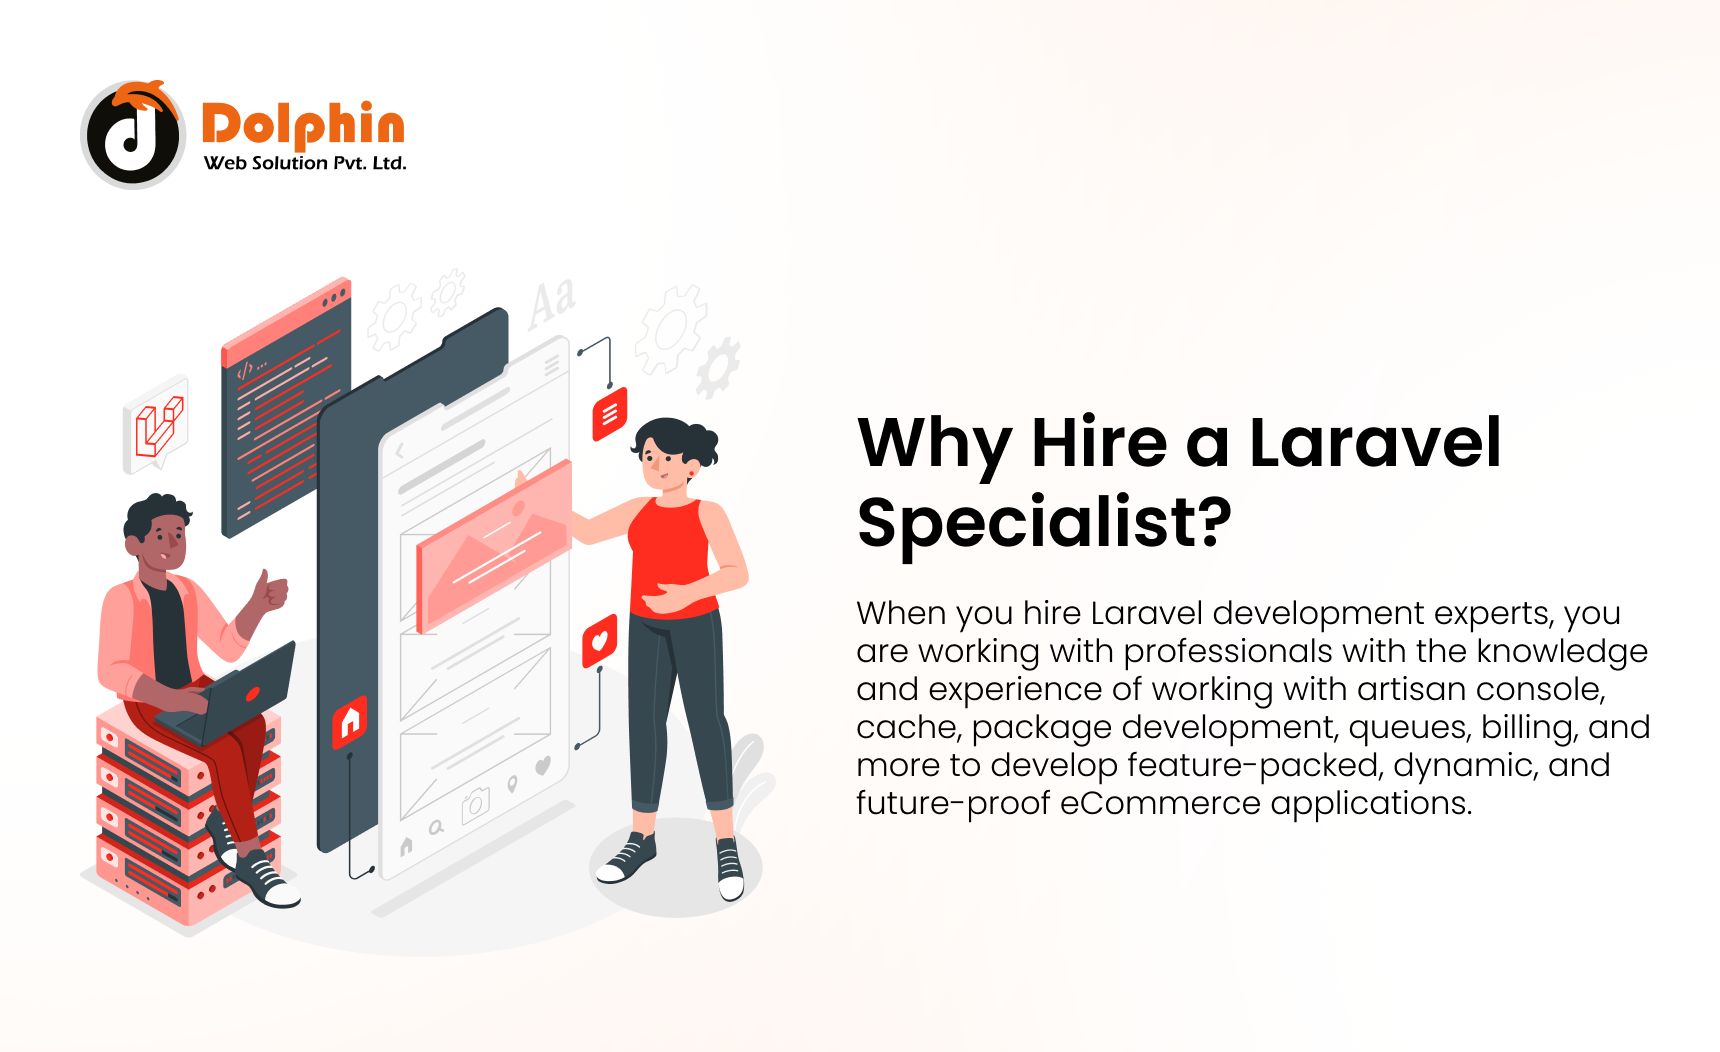 Why Hire a Laravel Specialist